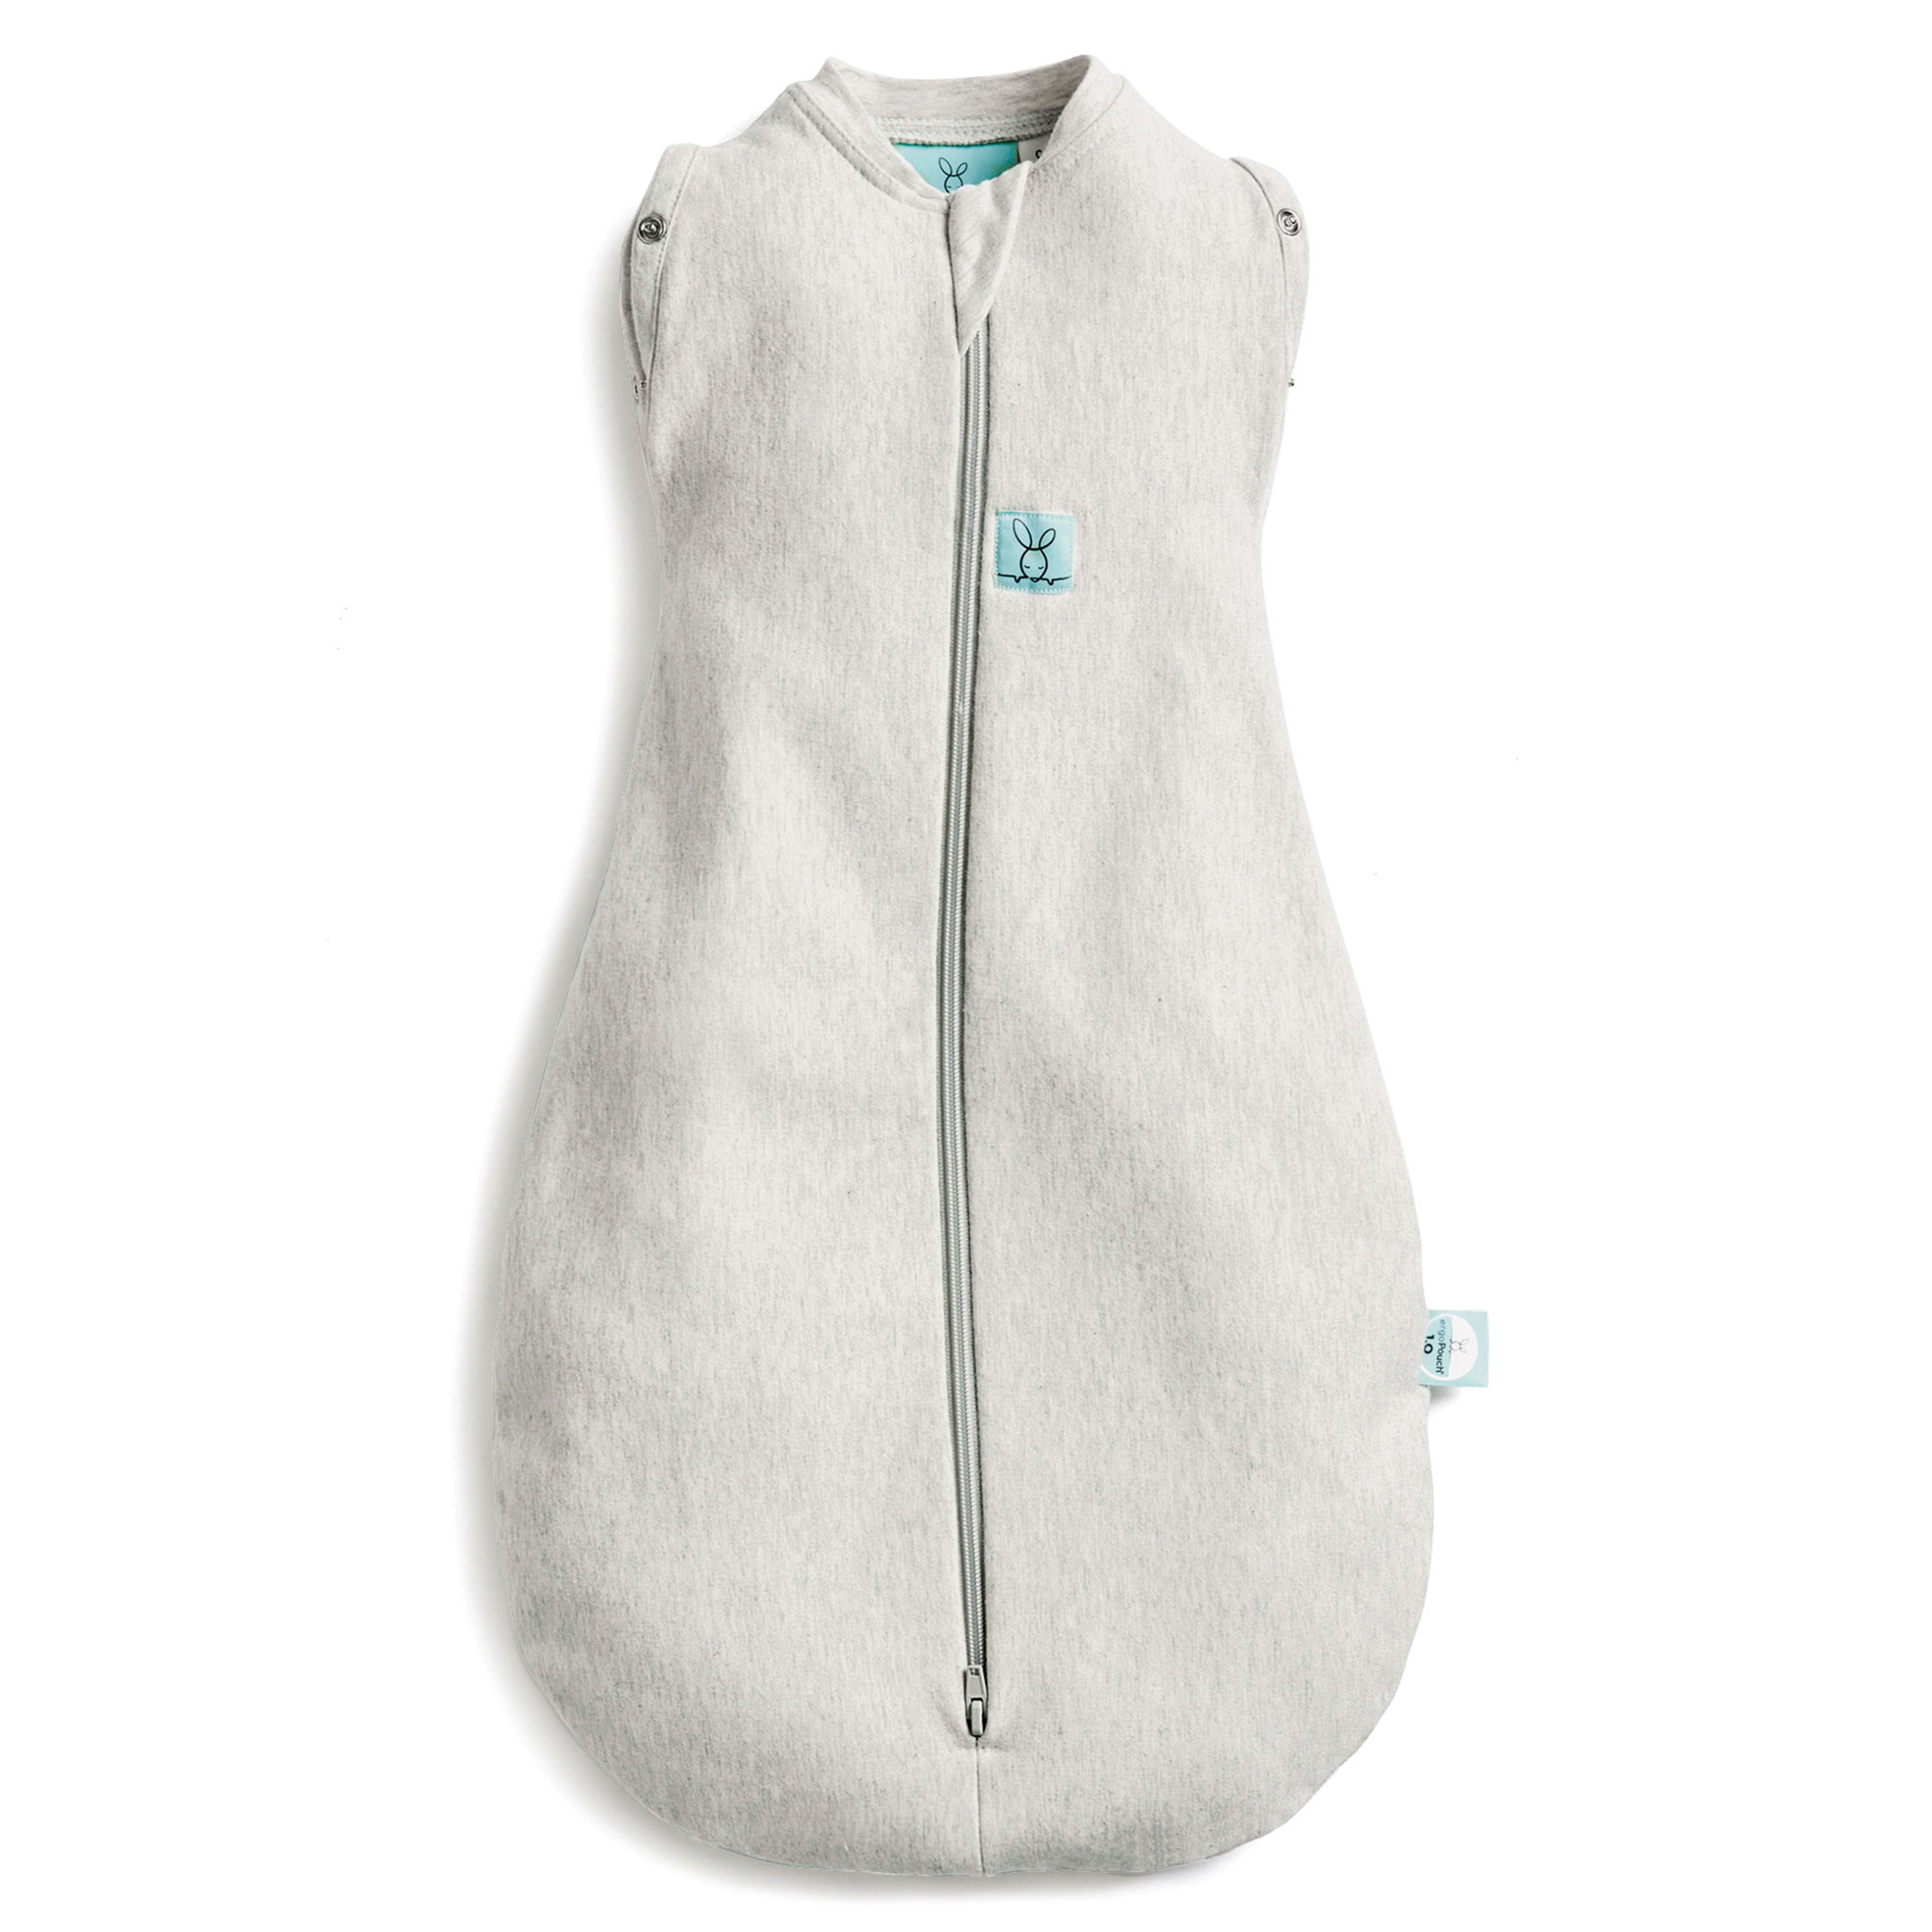 ergopouch-cocoon-swaddle-bag-0-2-tog-grey-marle-ergo-zepco-0-2t00-03mgm19- (1)